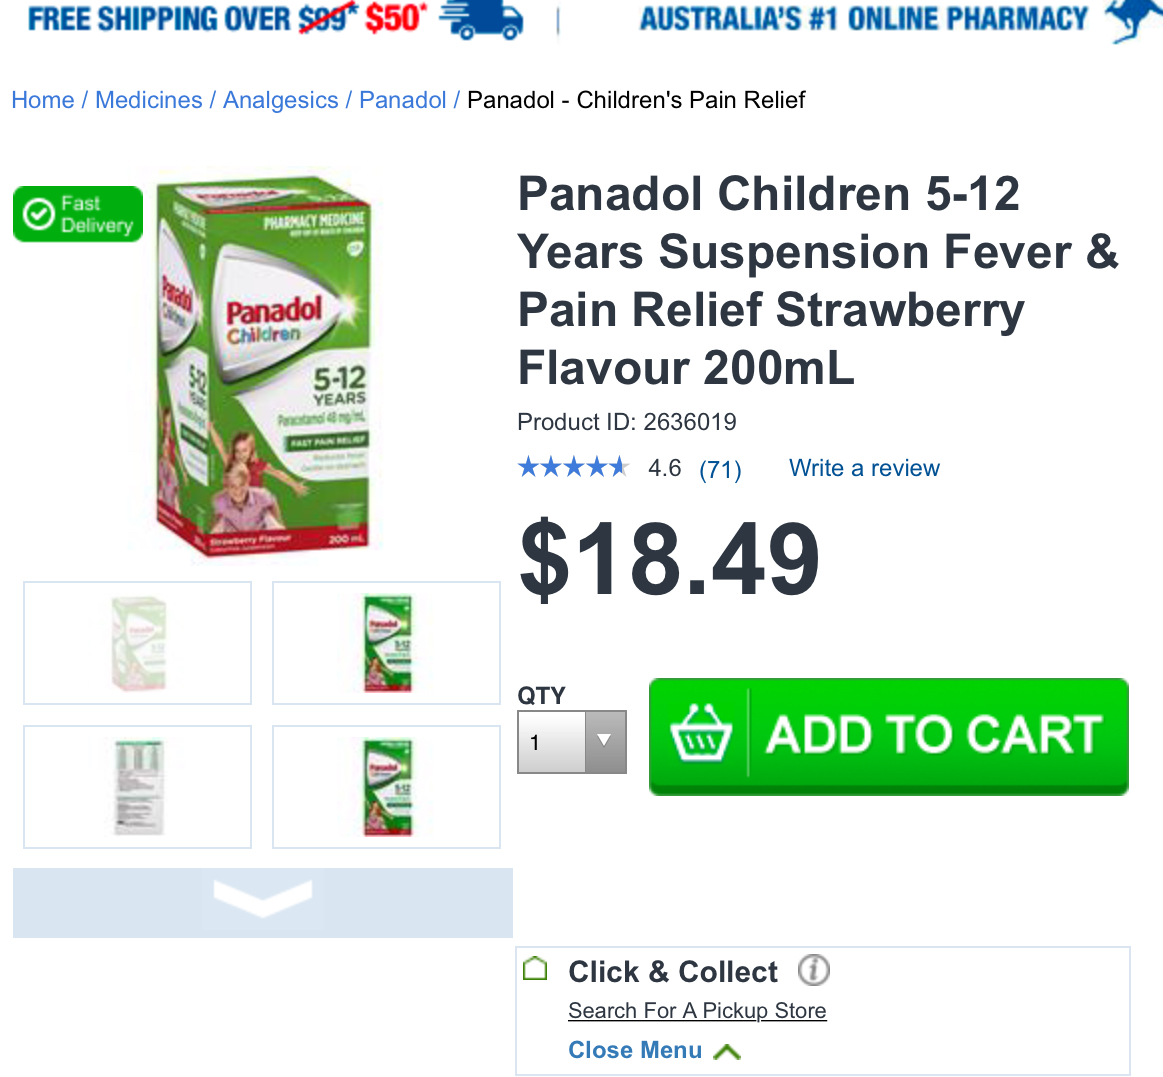 Today I went to pharmacy and want to buy 5-12 years old Panadol it’s  out of stock. @NSWHealth https://t.co/8VOL3h2n6O